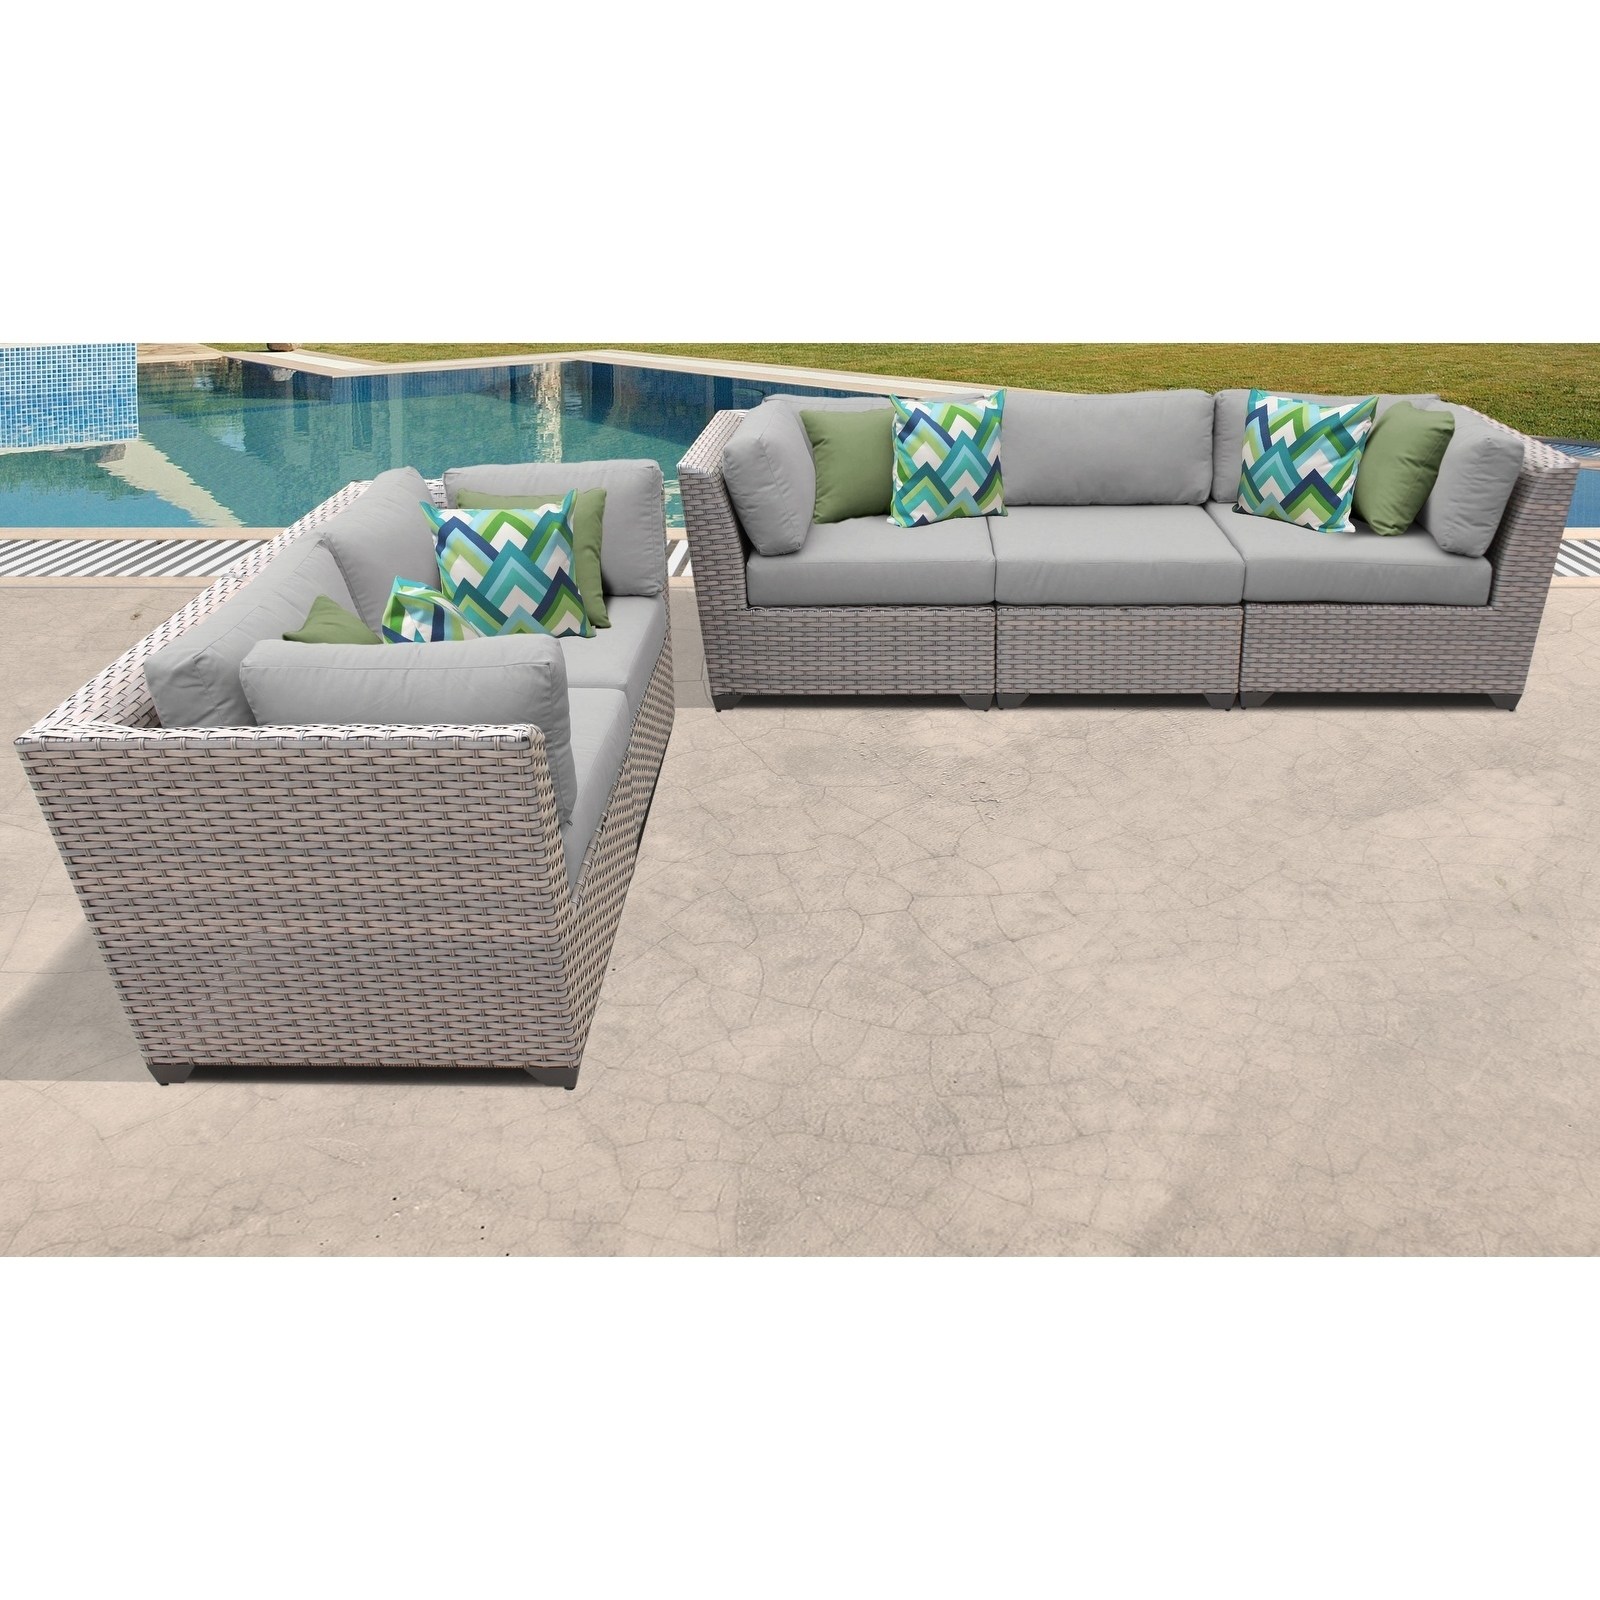 TK Classics Florence 5 Piece Outdoor Wicker Patio Furniture Set 05a - image 2 of 5